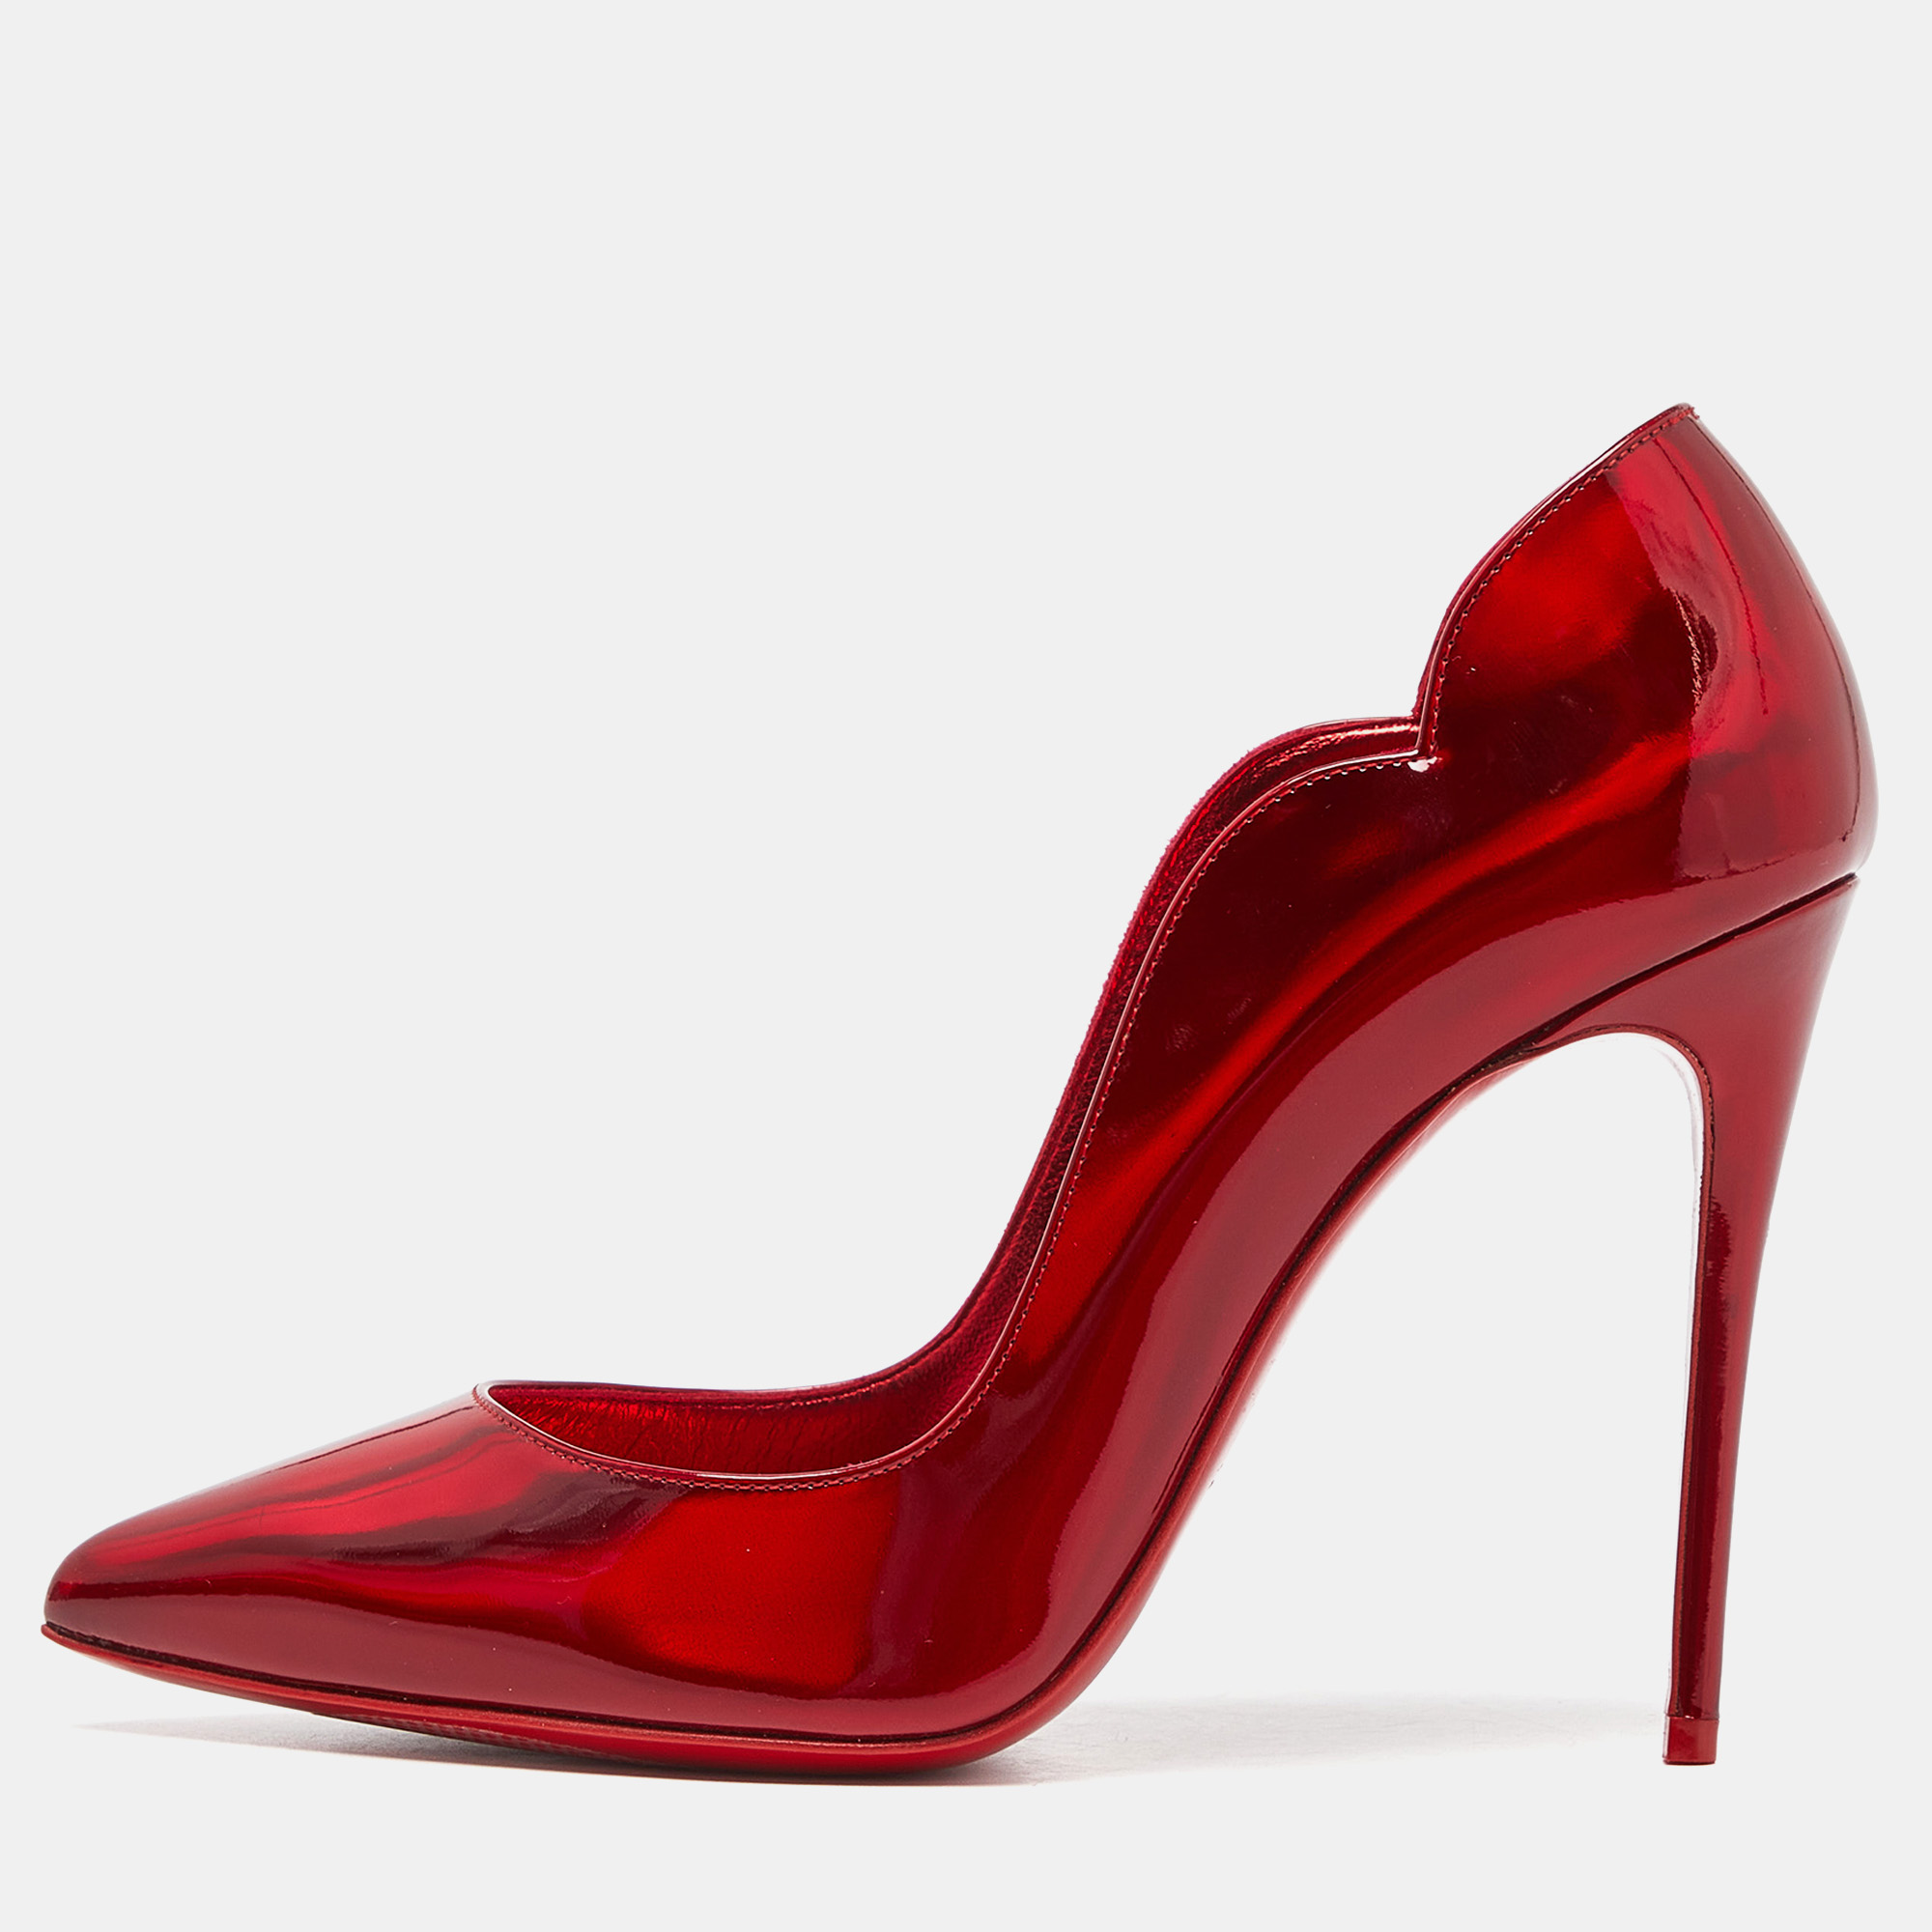 Christian louboutin red patent leather hot chick pumps size 37.5